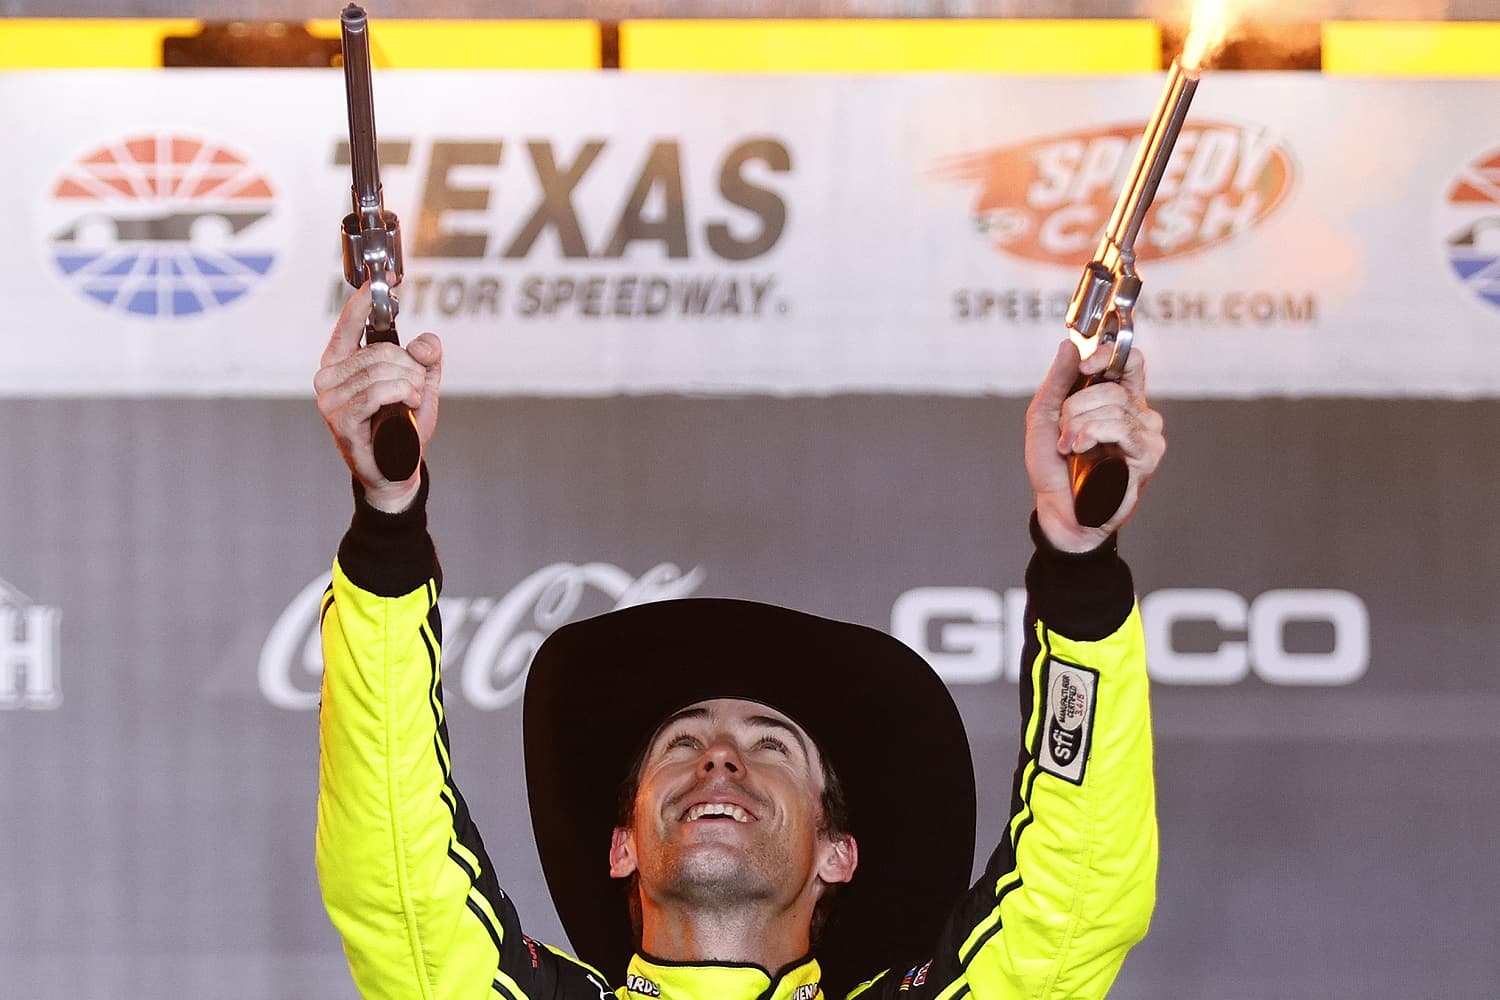 Ryan Blaney celebrates by shooting guns in Victory Lane after winning the NASCAR Cup Series All-Star Race at Texas Motor Speedway on May 22, 2022.